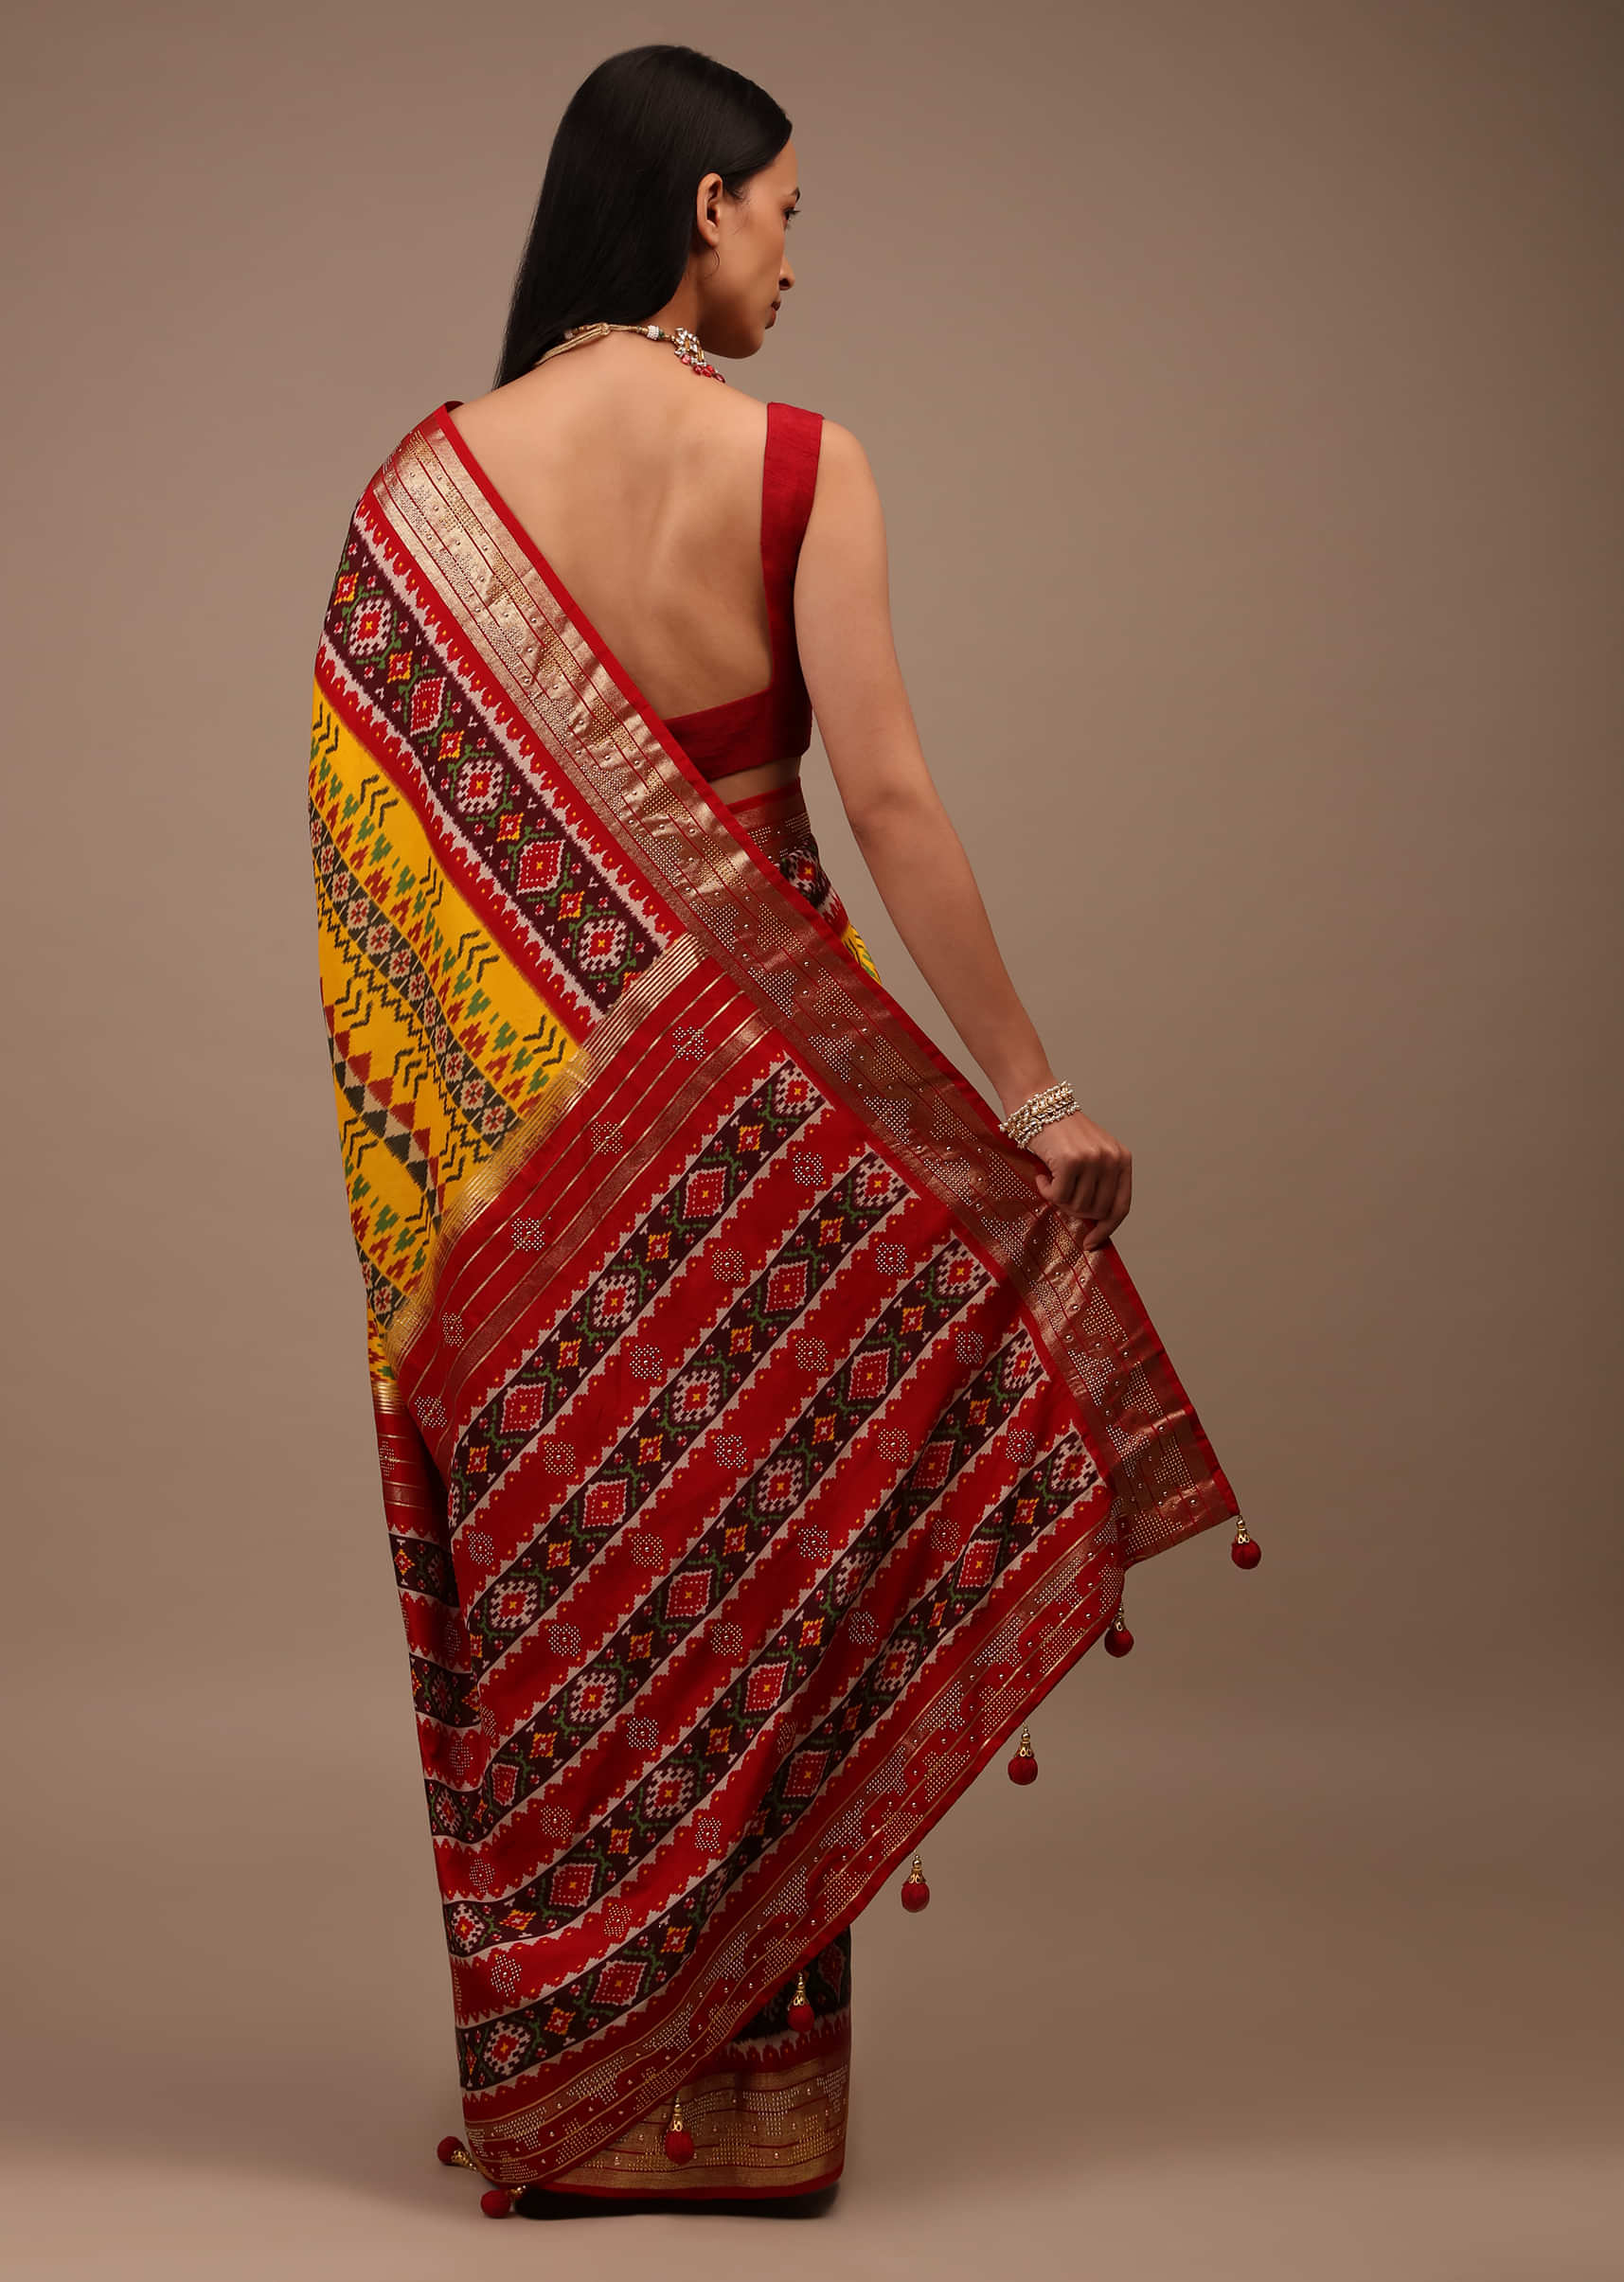 Chrome Yellow Saree In Silk With Multi Colored Patola And Foil Print And Contrasting Maroon Border